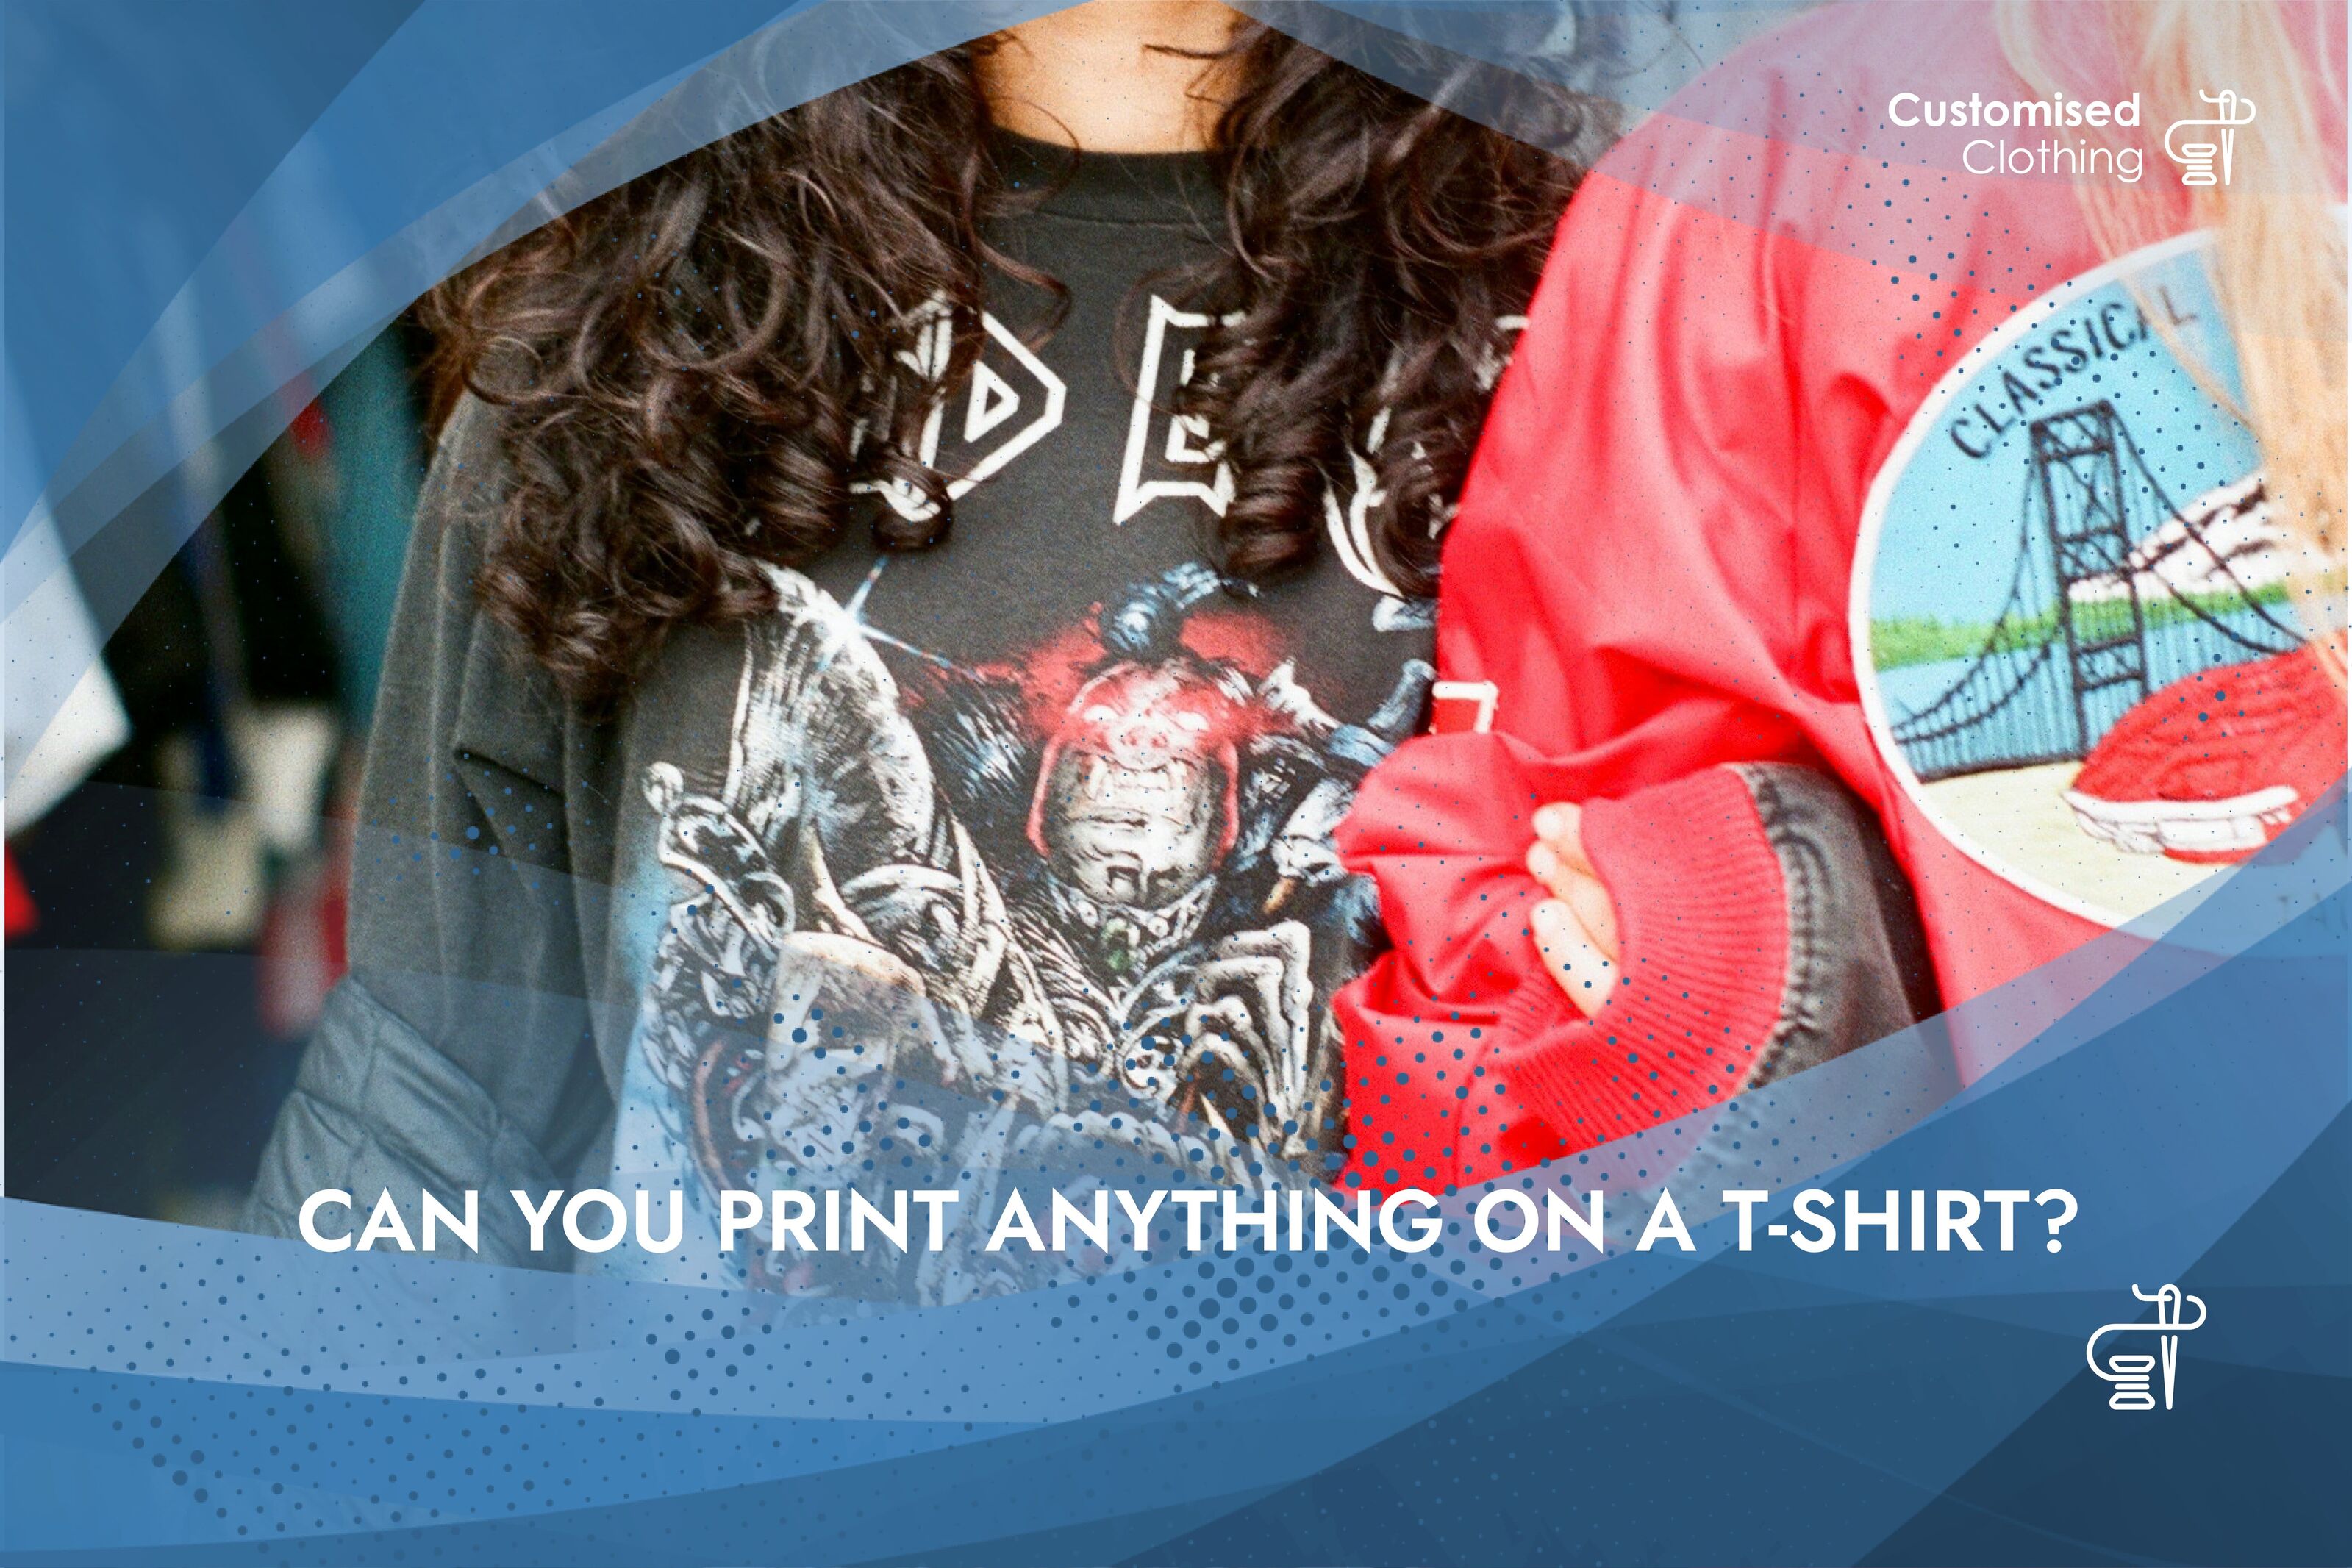 Can you print anything on a t-shirt?